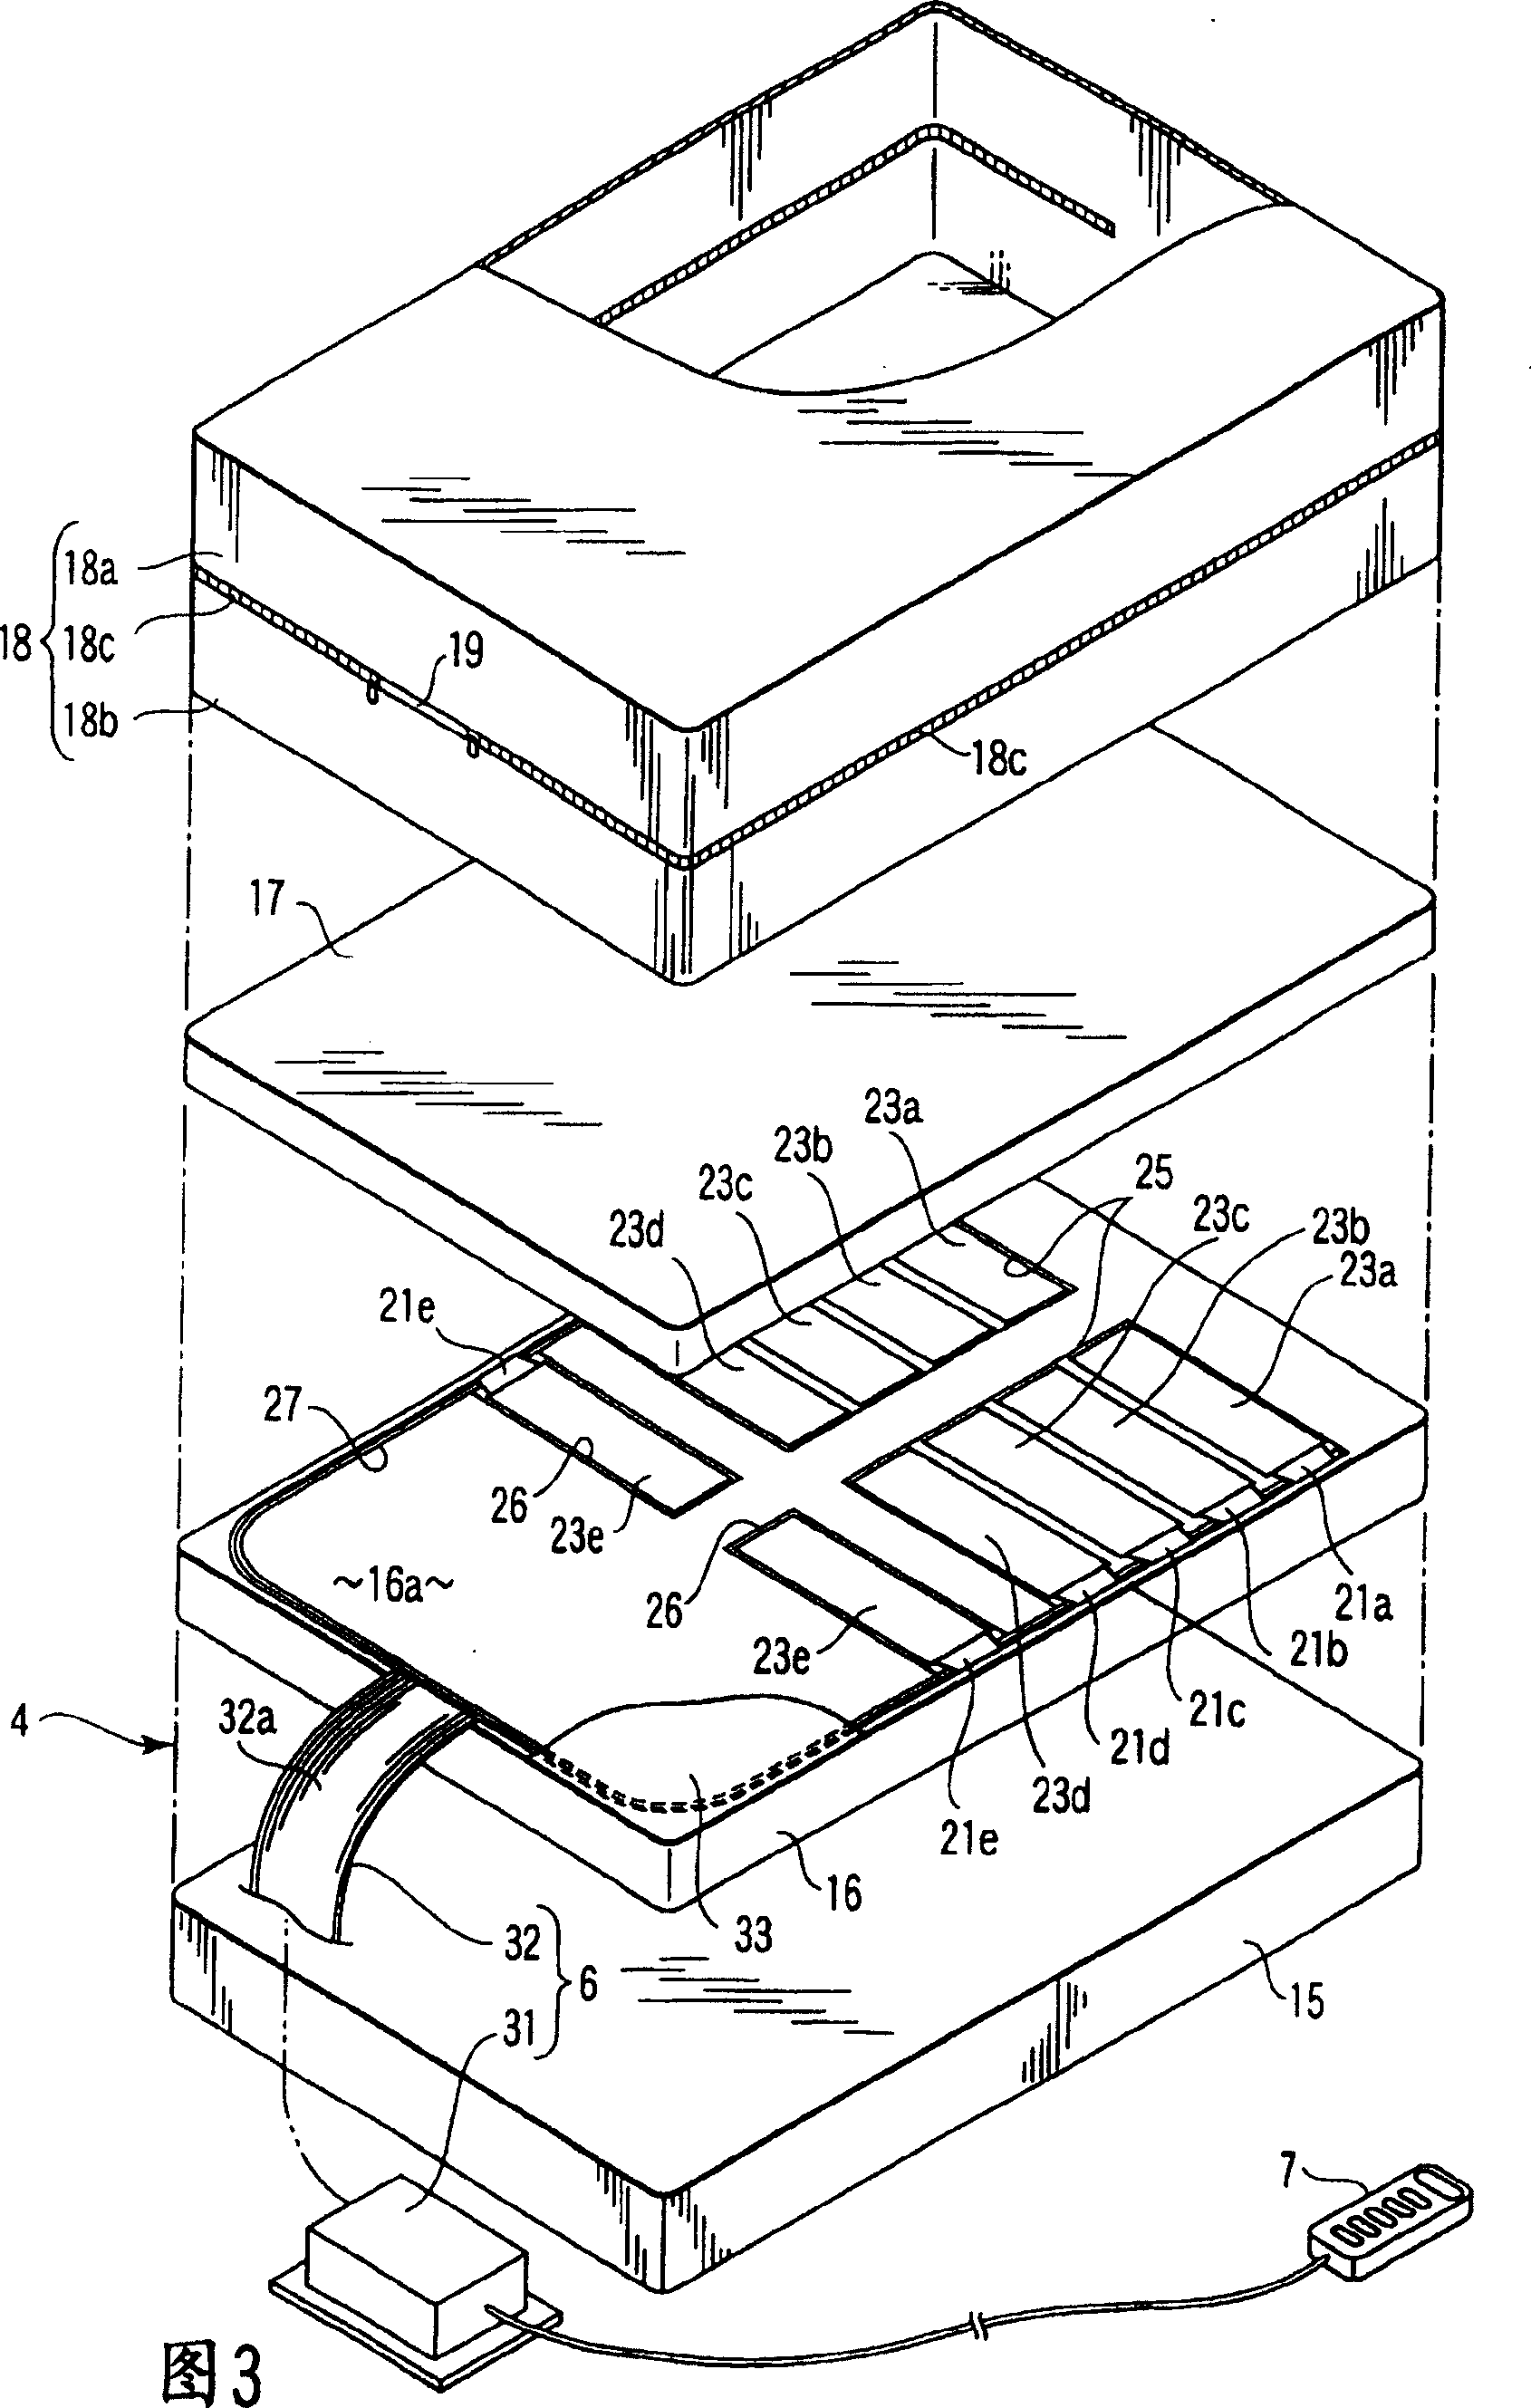 Massaging device and bed